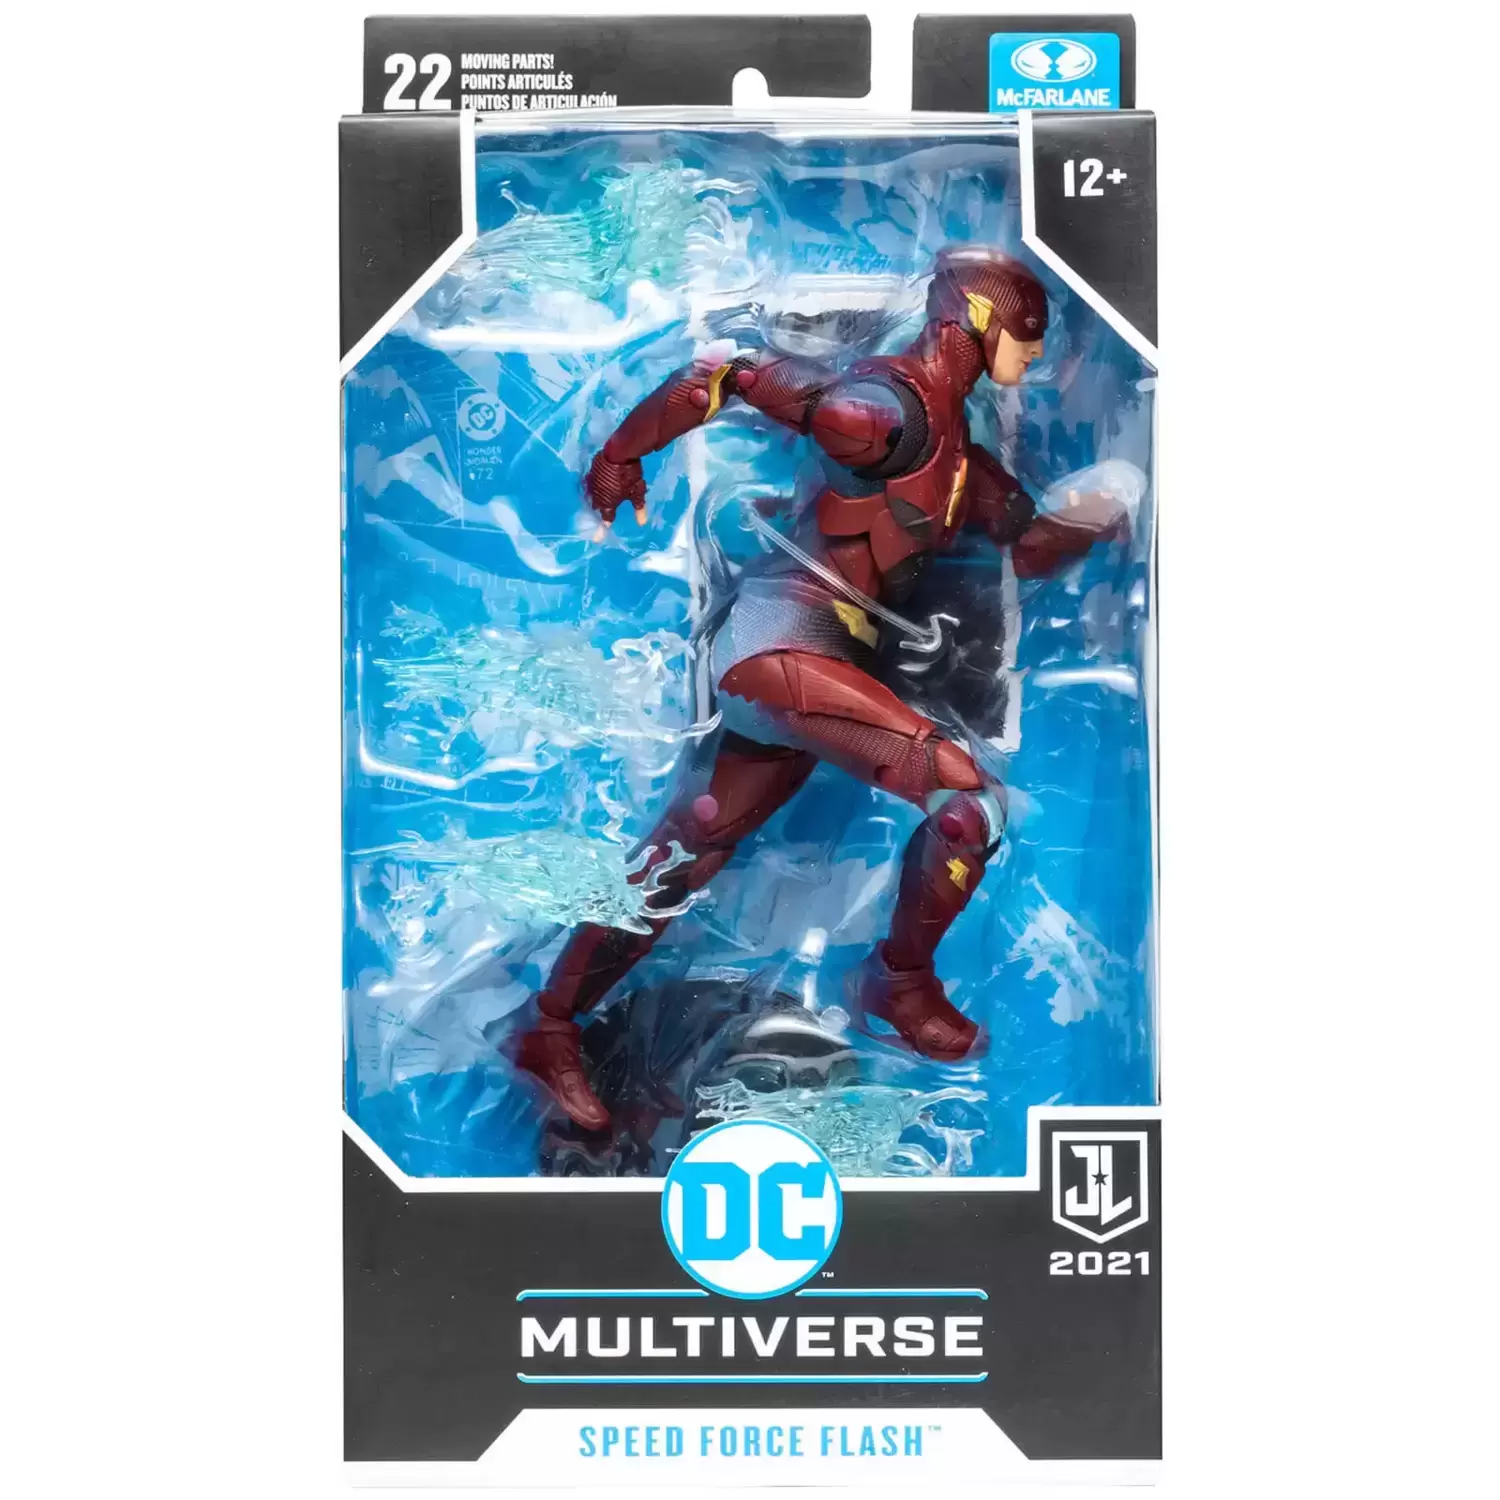 McFarlane - DC Multiverse - Speed Force Flash - NYCC Edition